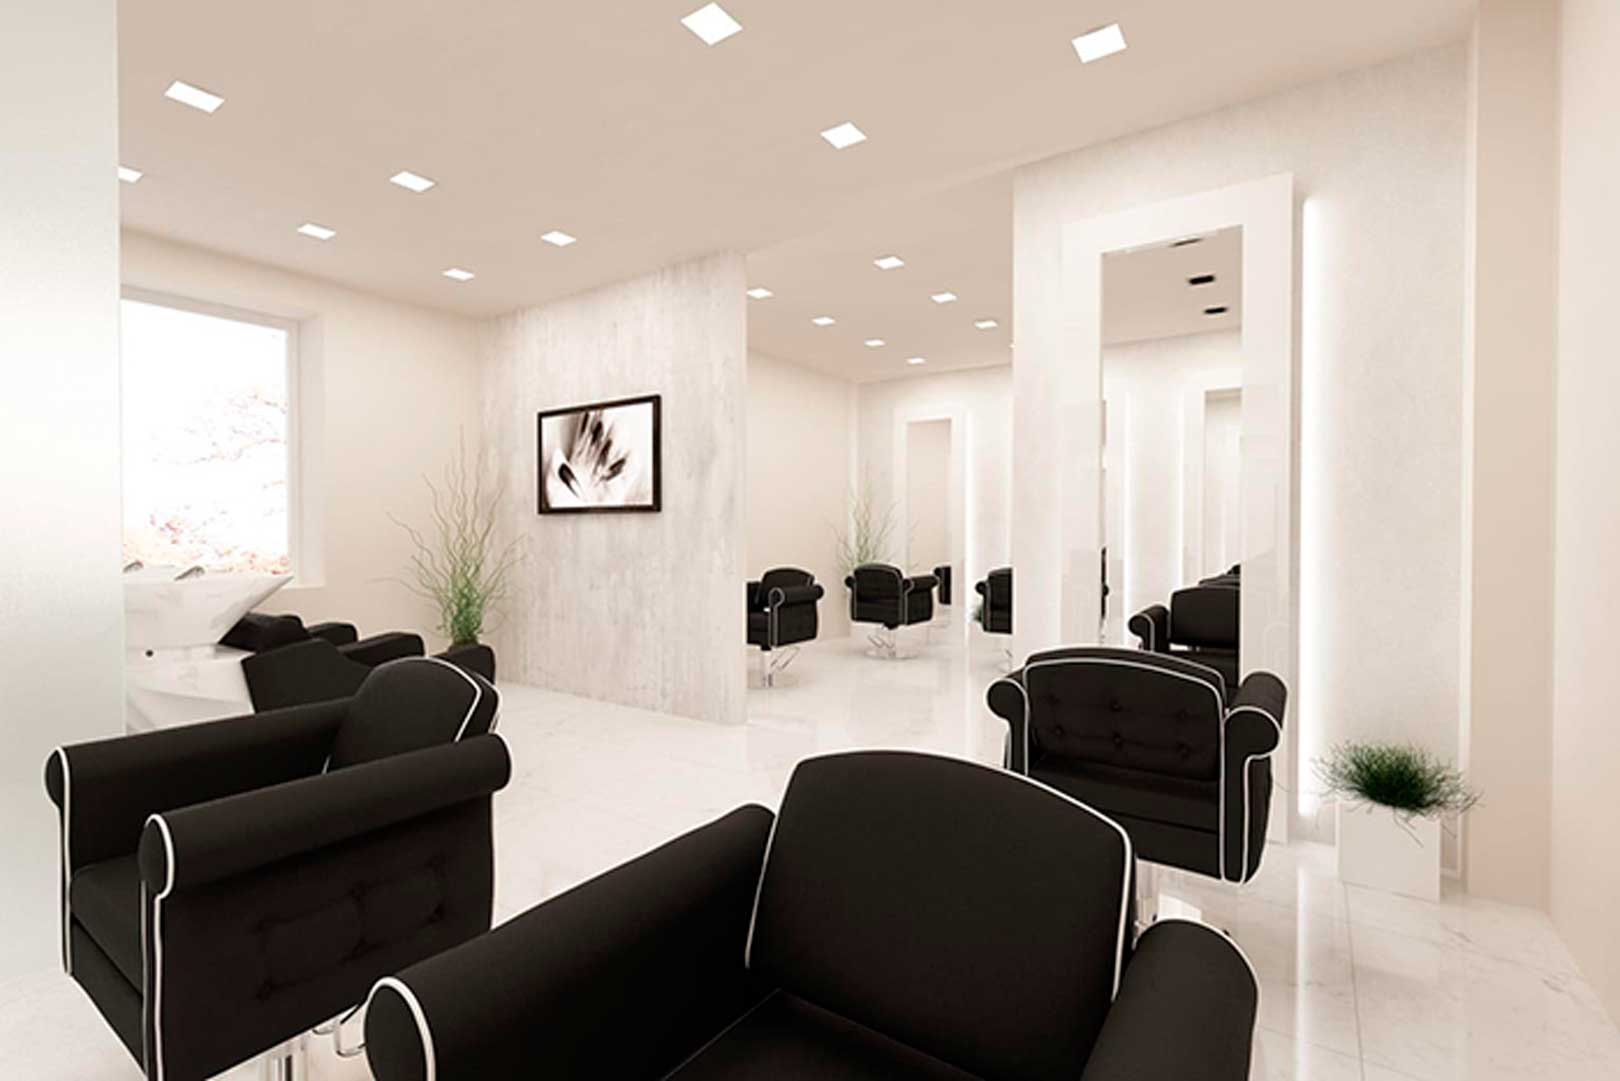 Salon De Beauté Milano The Best Beauty Centers in Milan | FLAWLESS.life - The Lifestyle Guide